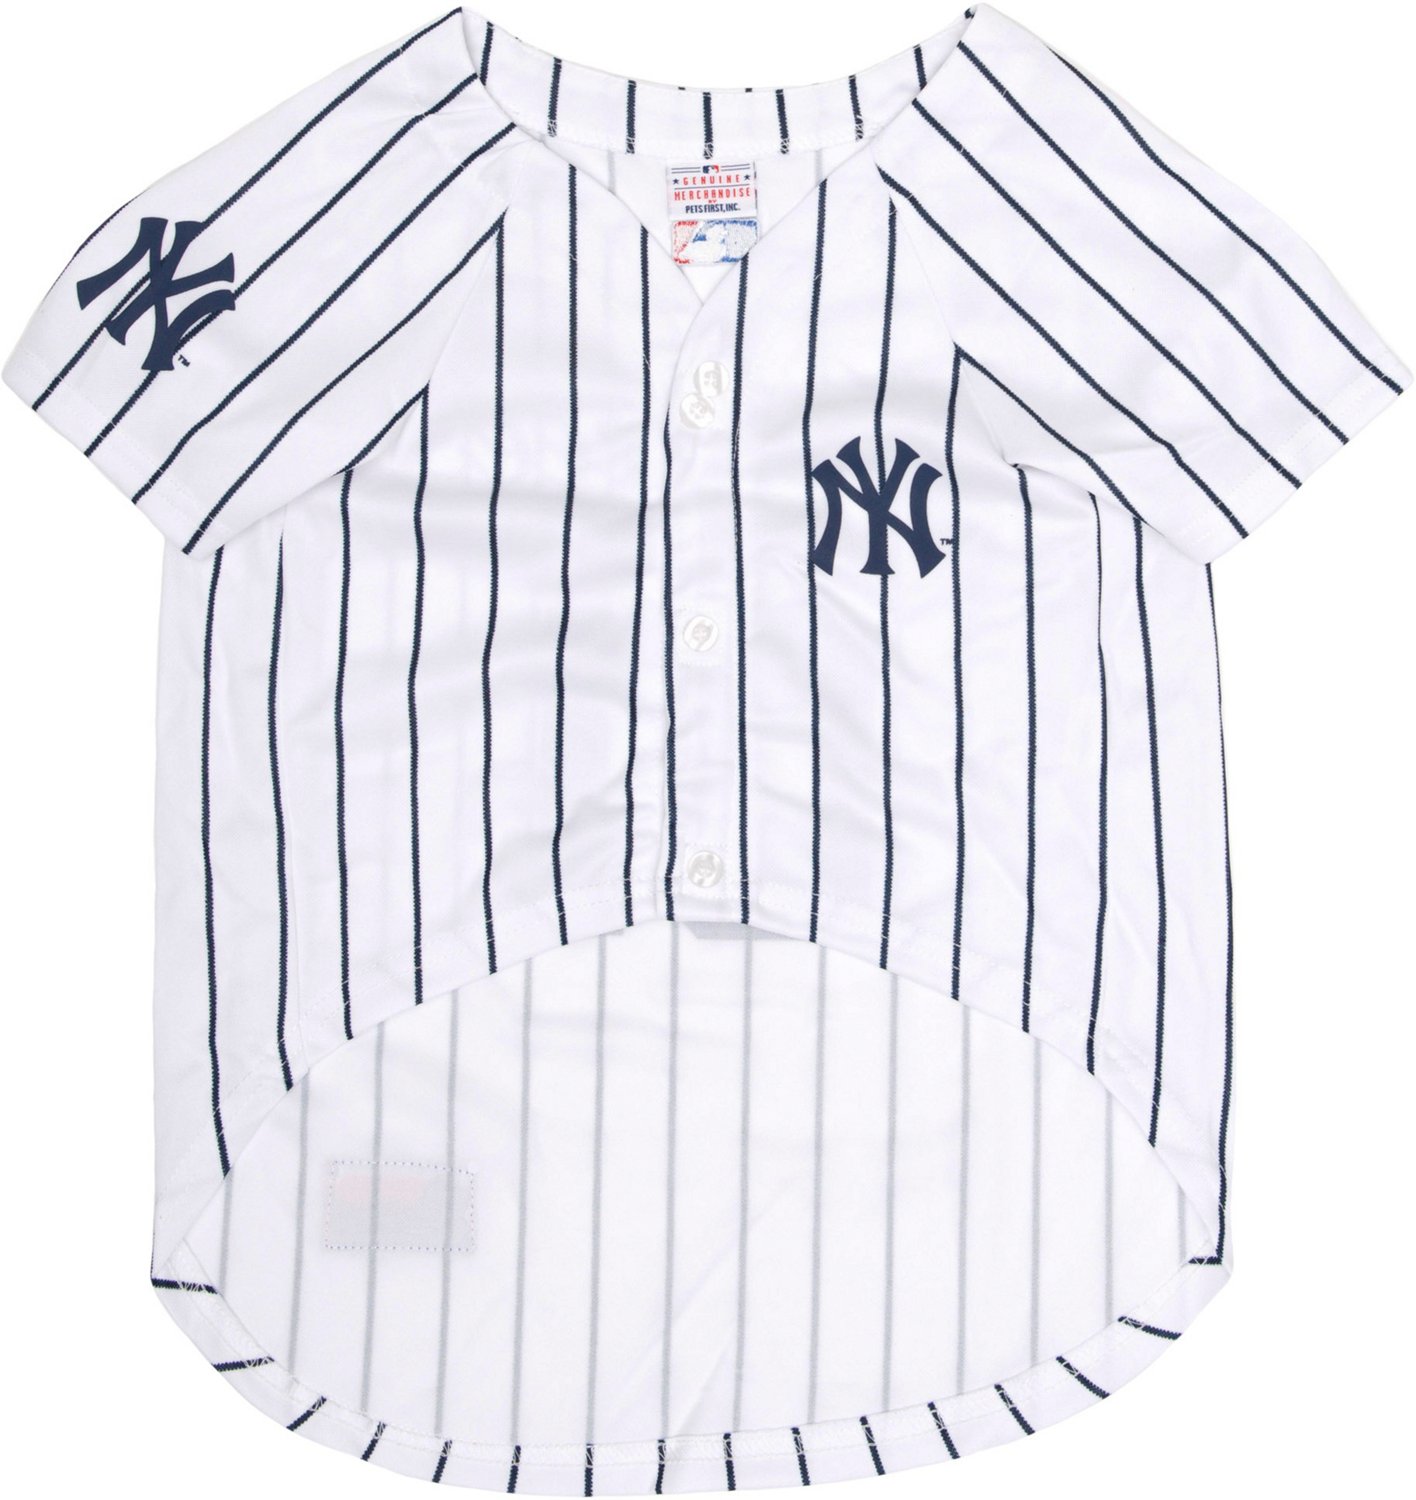 Yankees Athletic Wear for Dogs